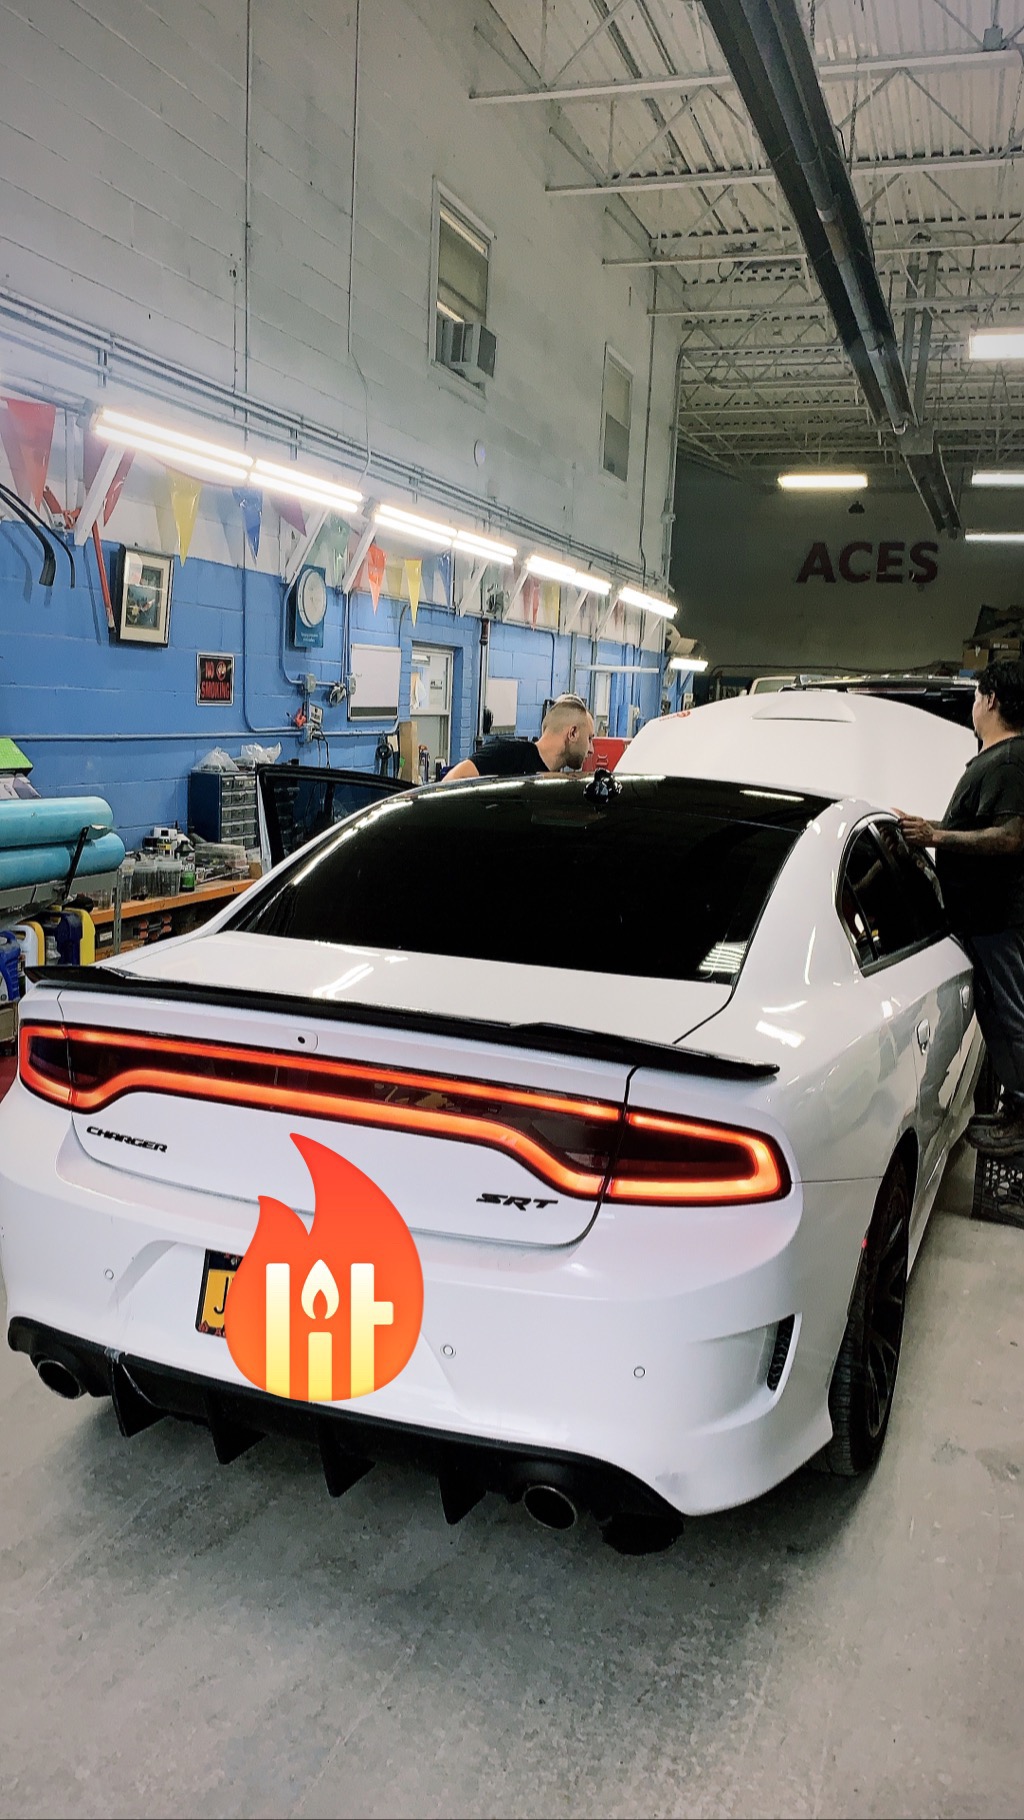 2018 Dodge Charger - photo 2